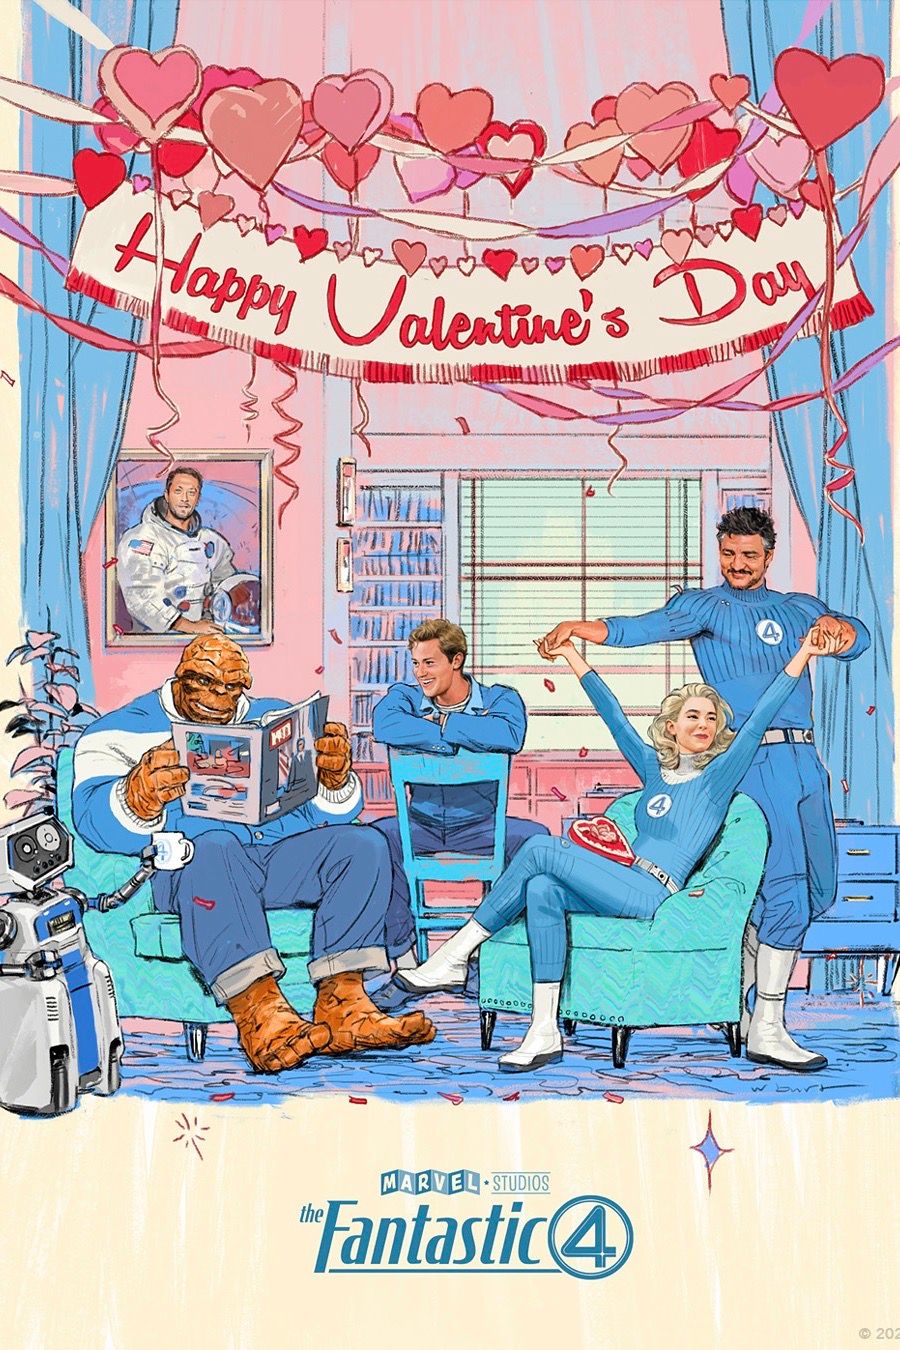 Fantastic Four 2025 Valentines Day Poster Featuring Pedro Pascal, Vanessa Kirby, Ebon Moss-Bachrach, and Joseph Quinn